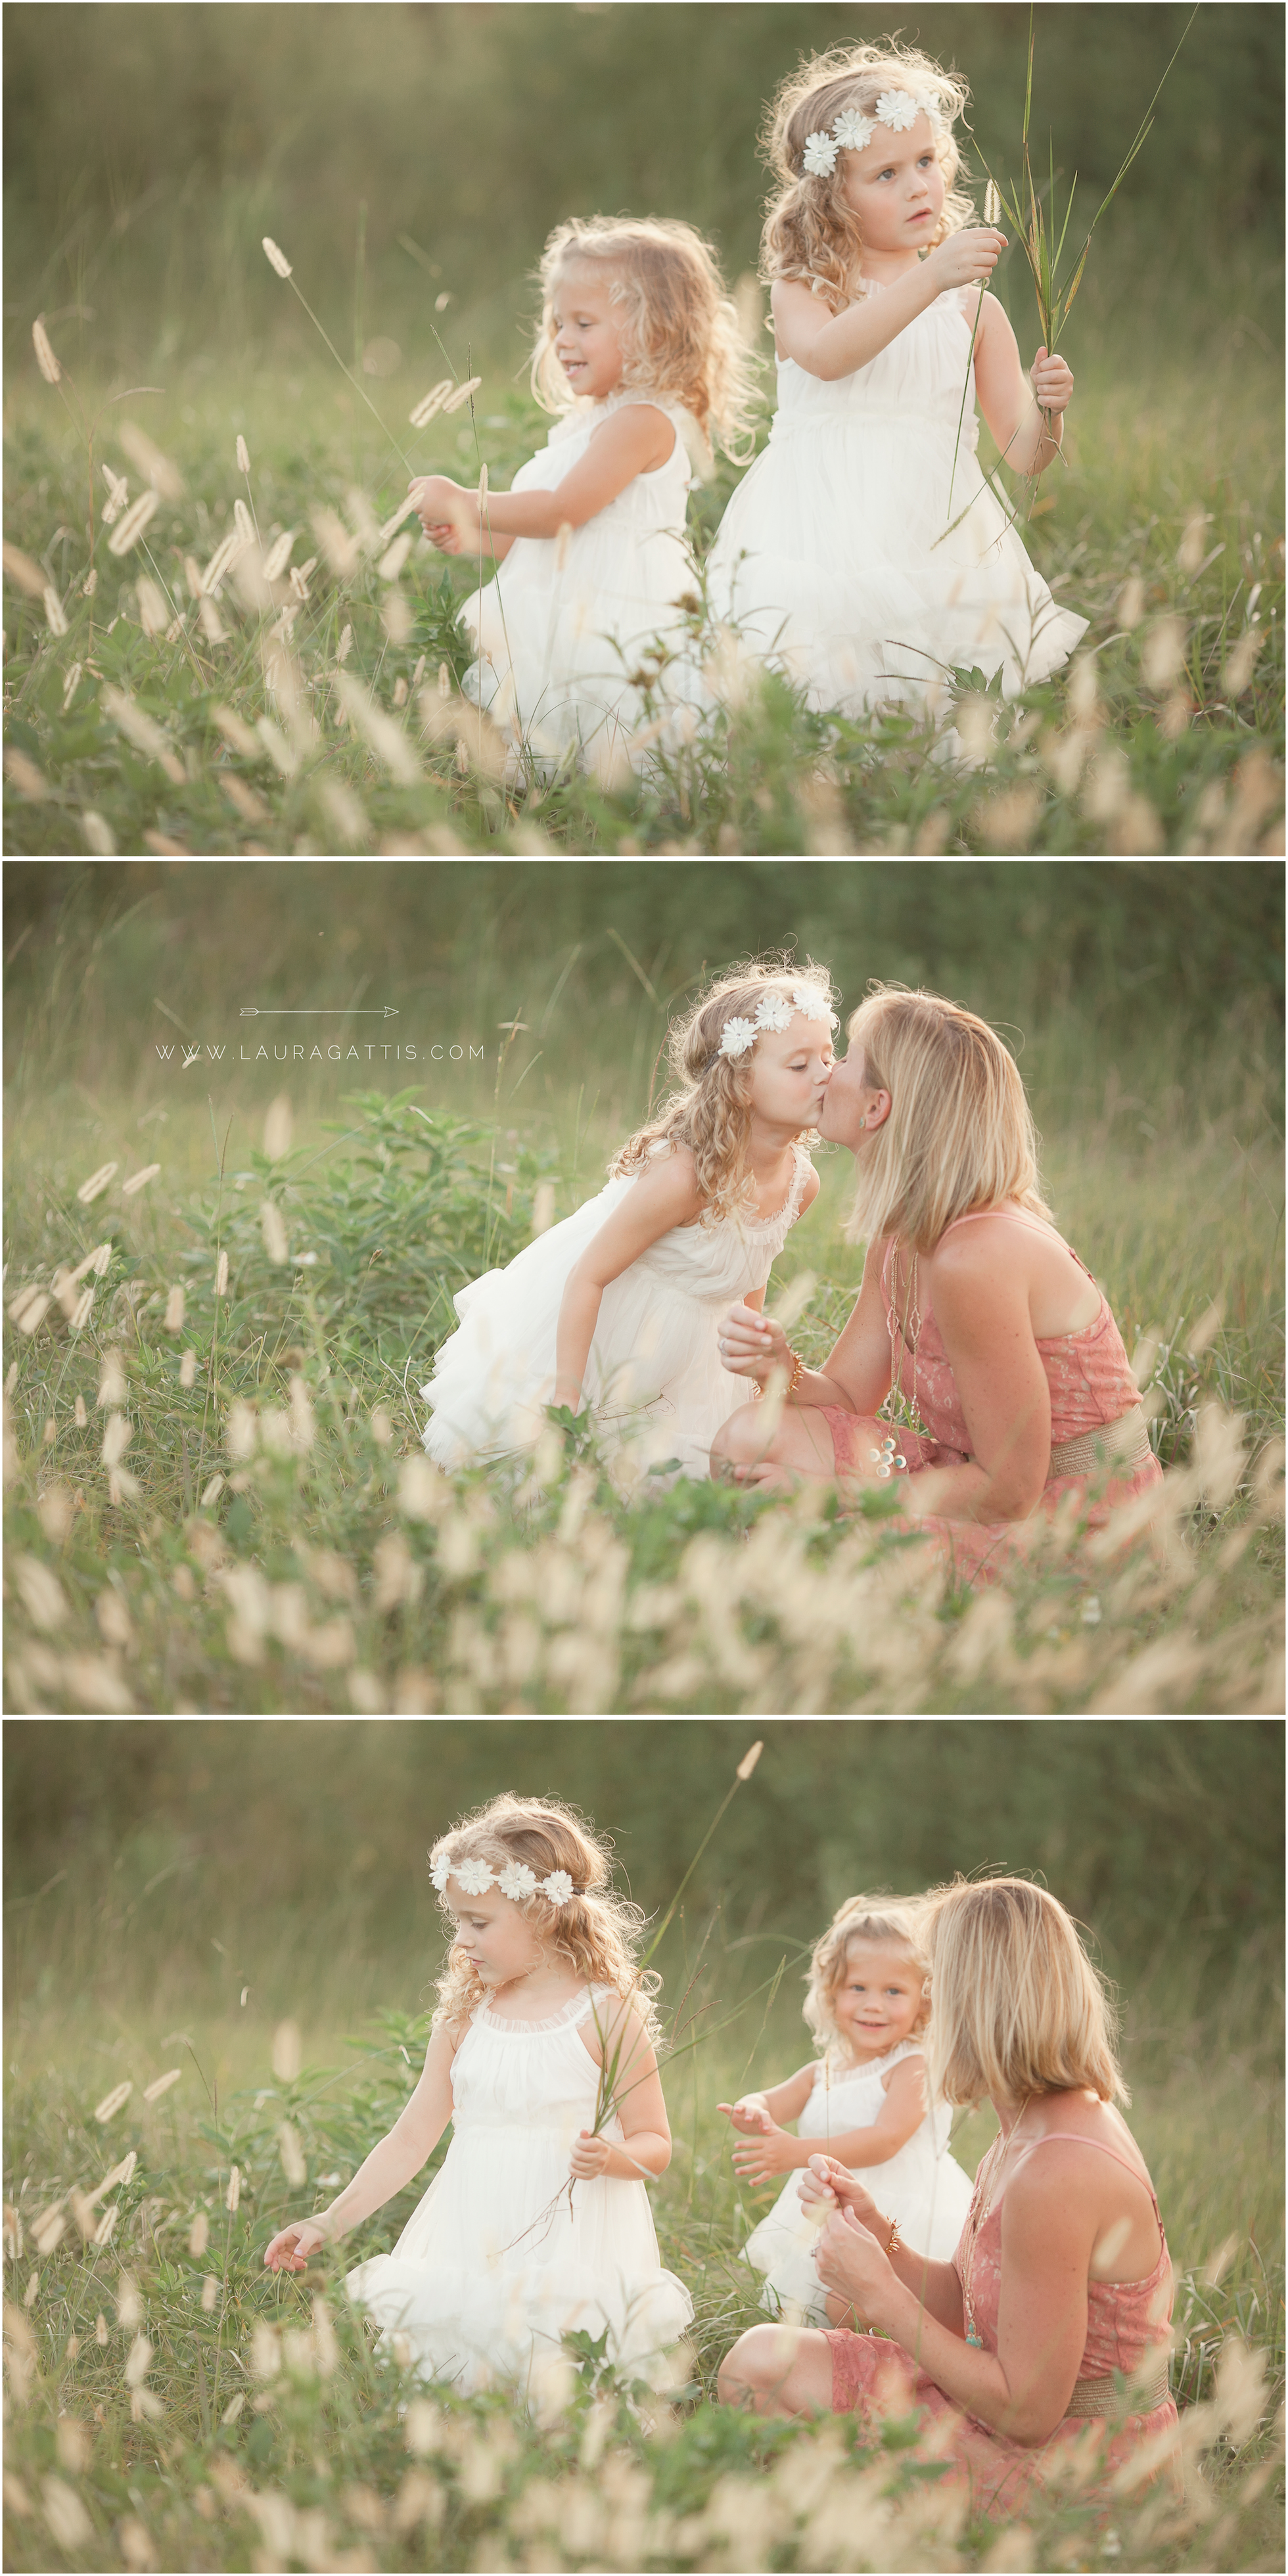 natural light outdoor family session | laura gattis photography